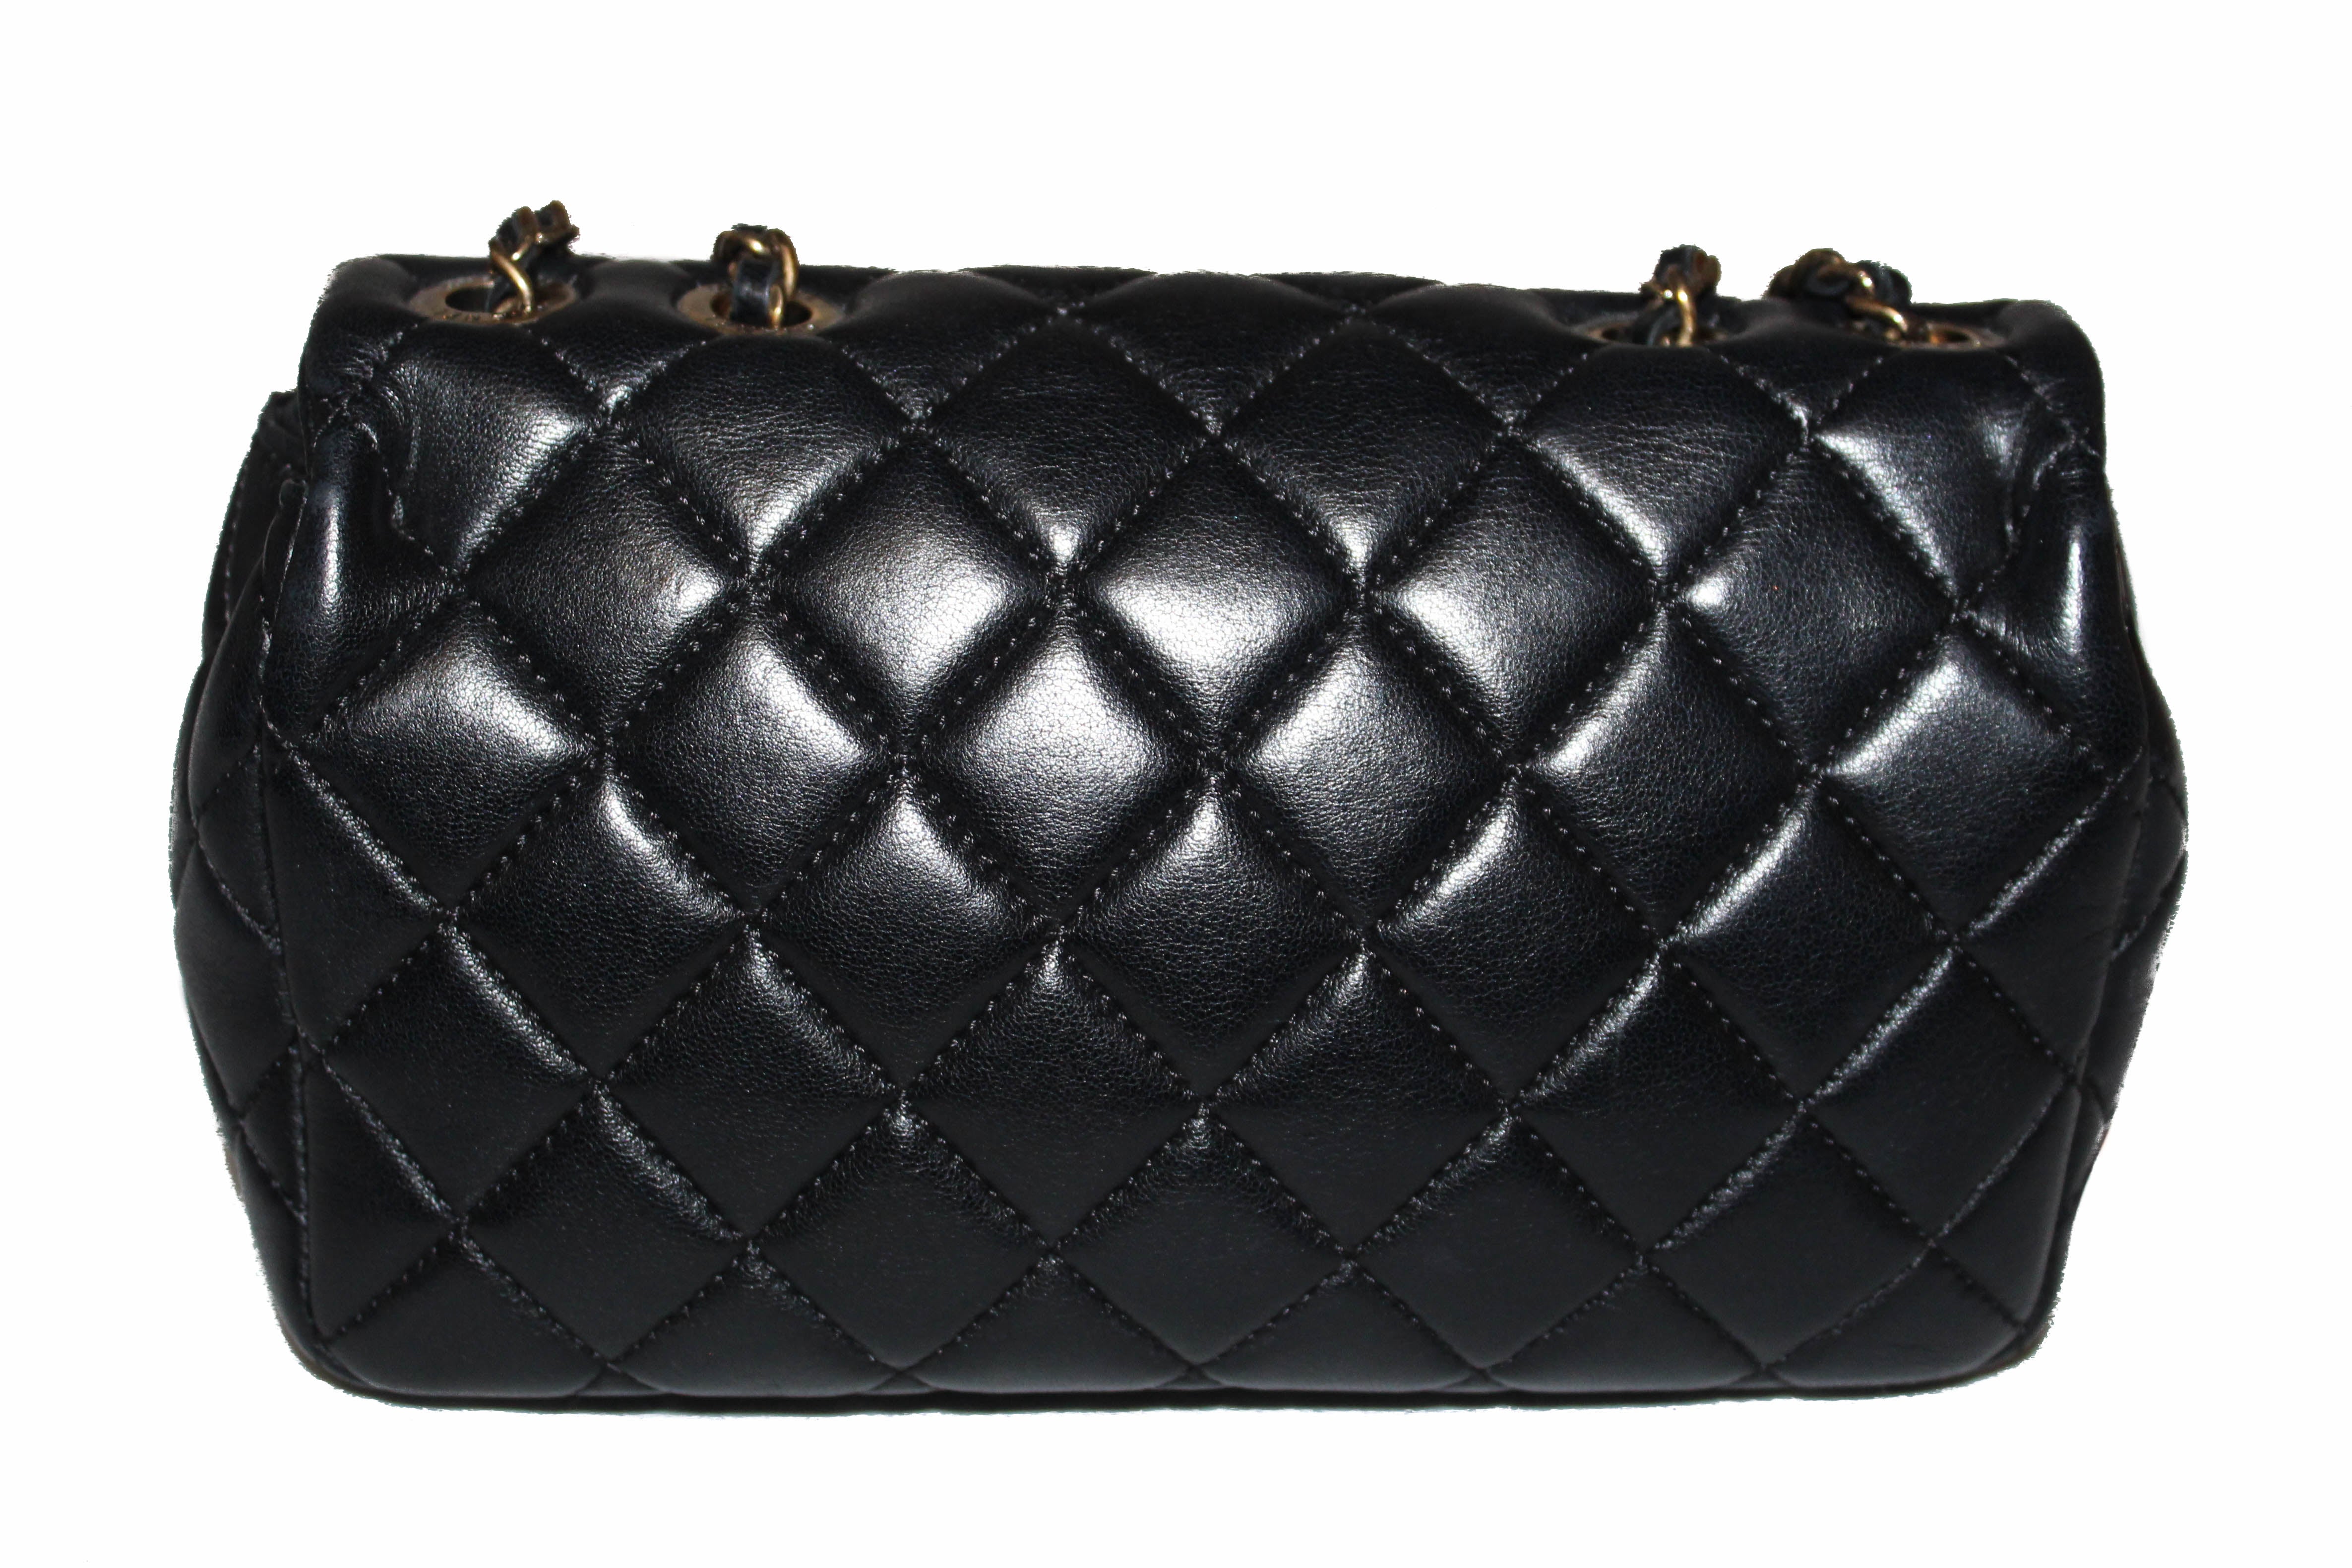 Authentic Chanel Black Lambskin Leather Mini Rectangular Quilted Classic Chain Bag